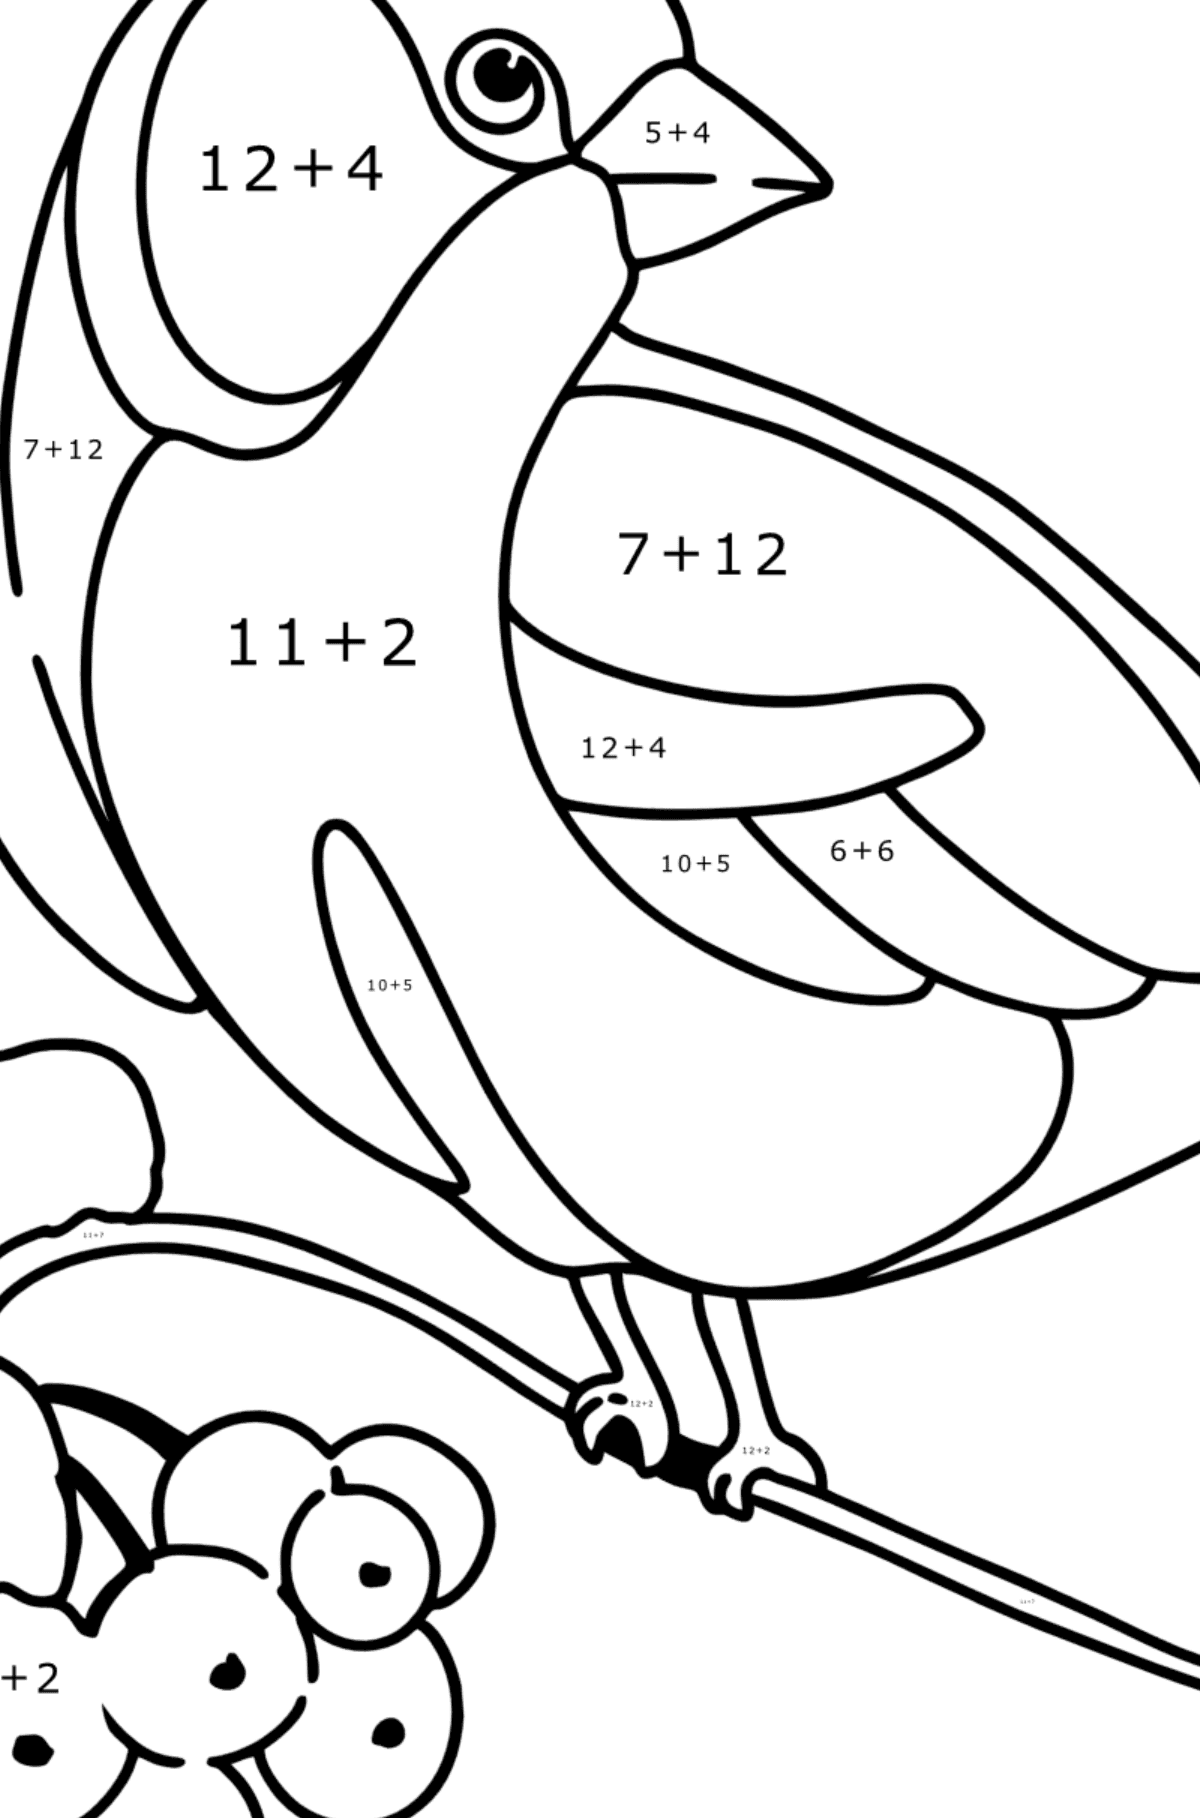 Coloring page - Titmouse on Mountain Ash - Math Coloring - Addition for Kids